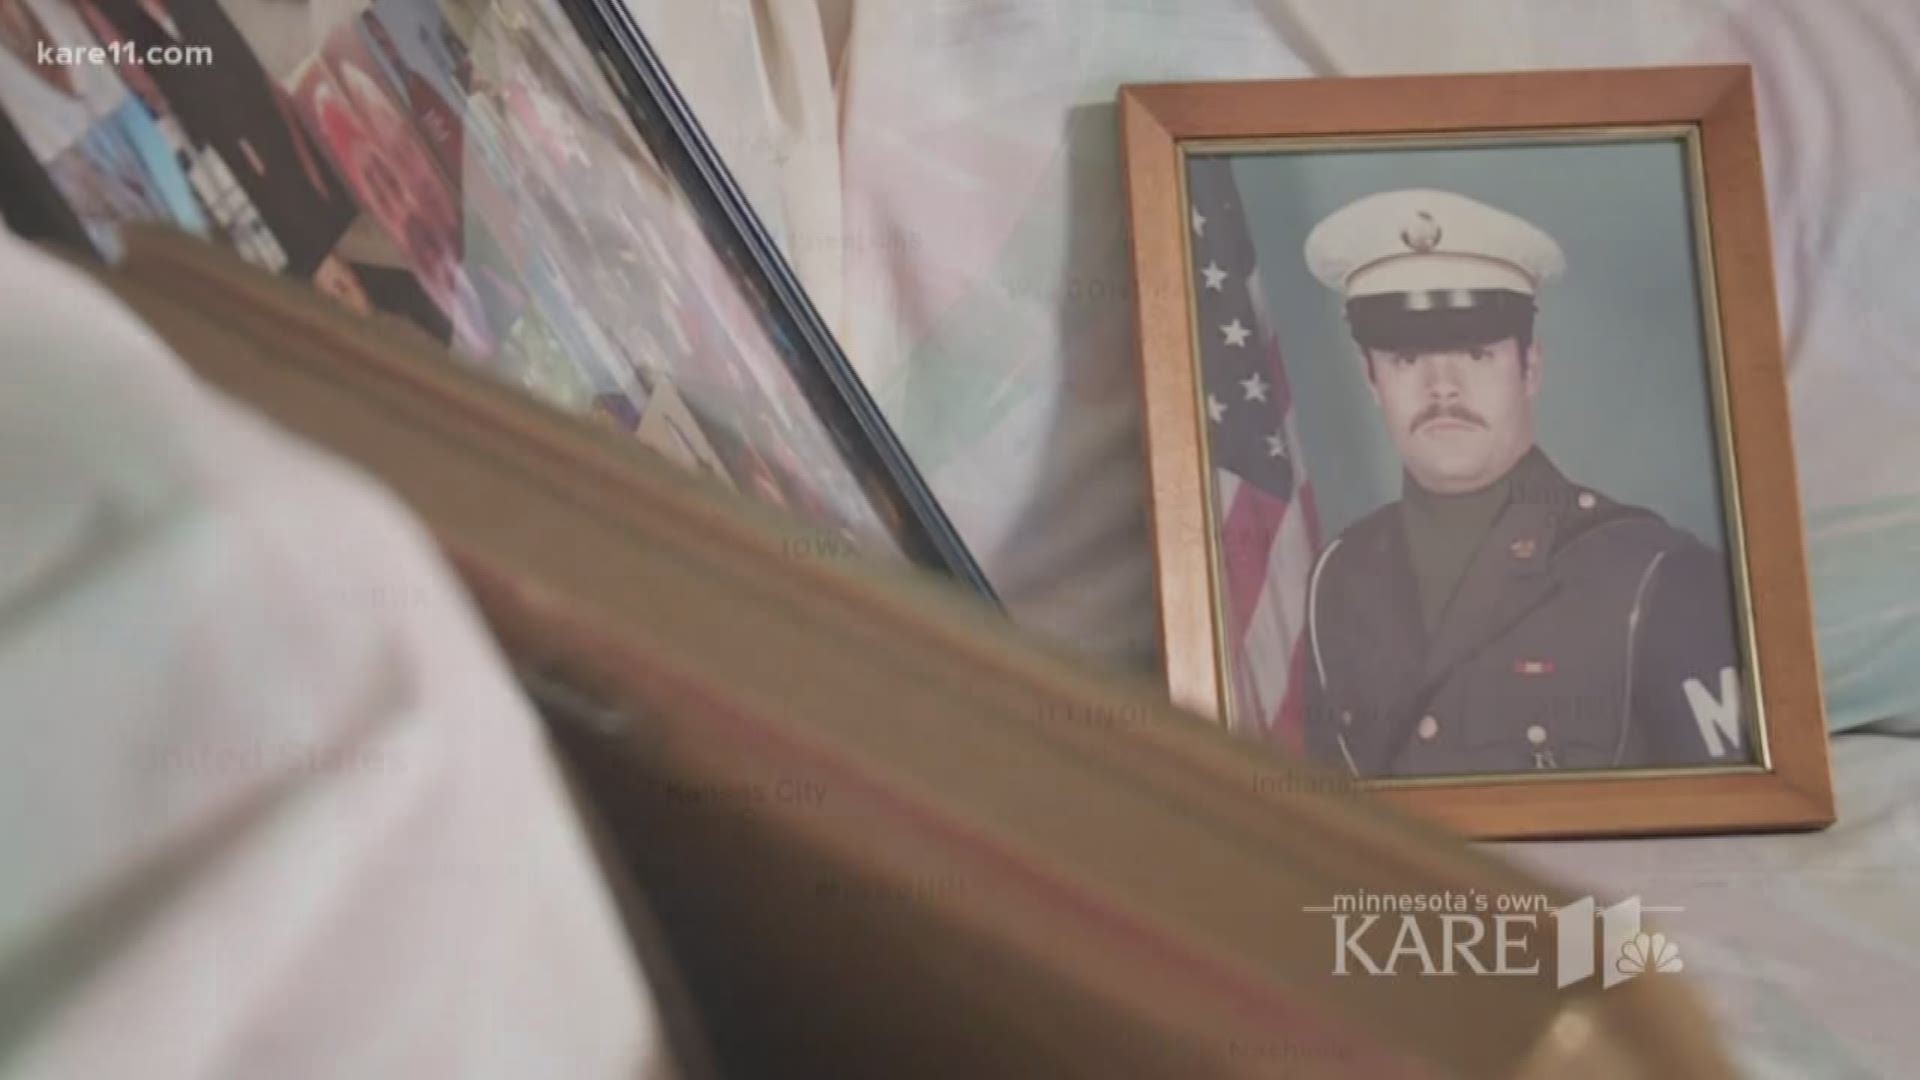 New medical research suggests veterans with VA insurance get fewer transplants and have higher death rates. http://kare11.tv/2BF4V1V